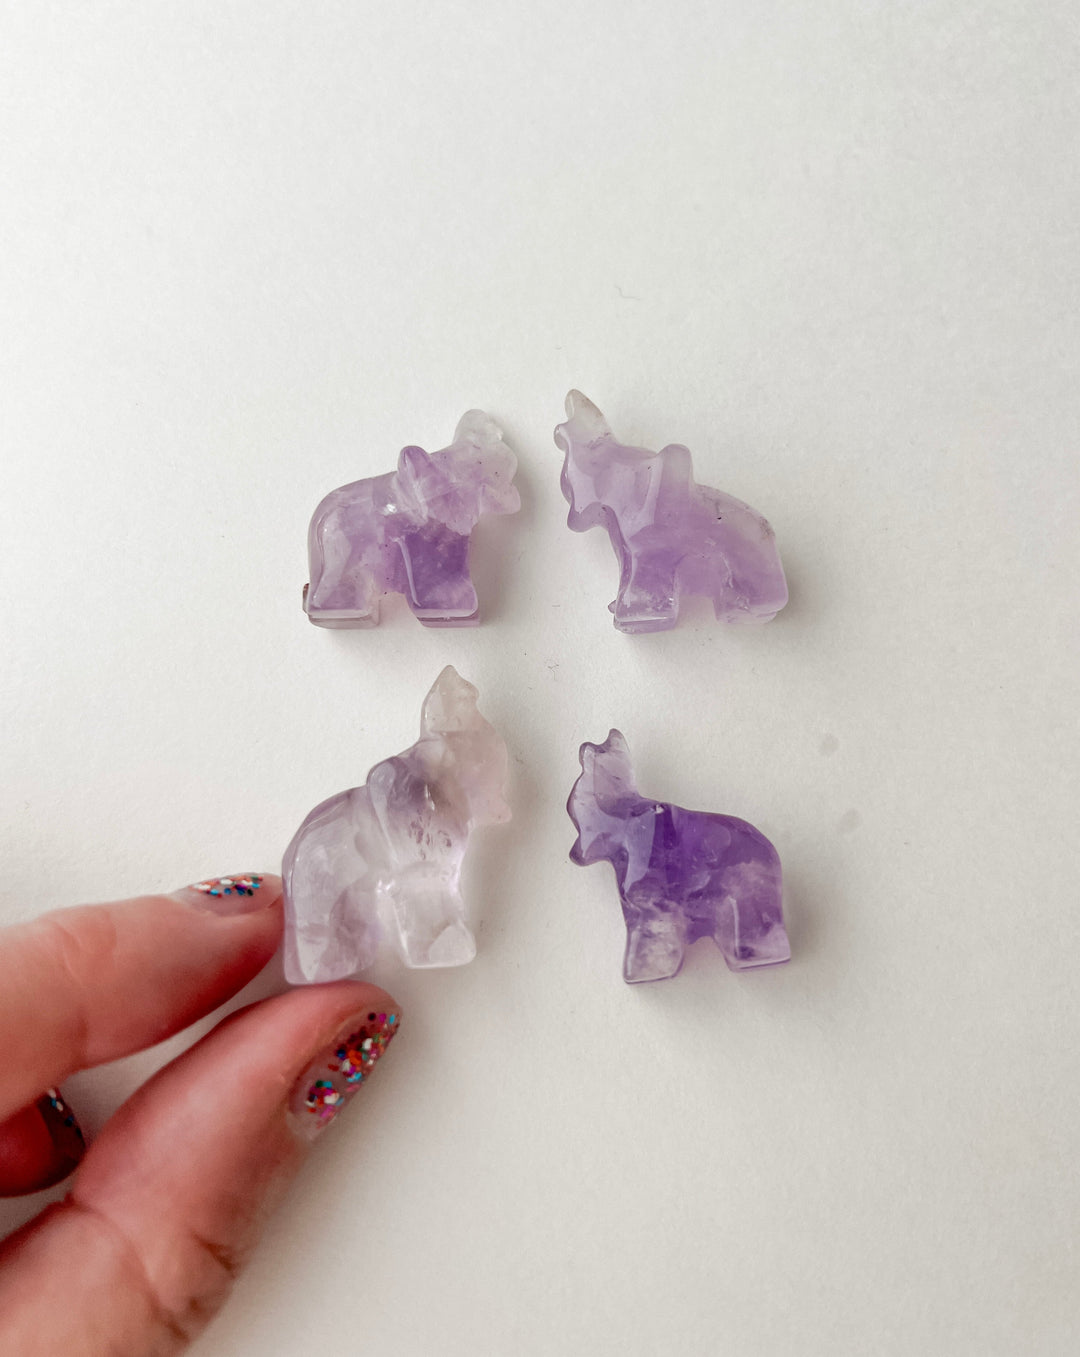 Amethyst Elephant // Tension + Protection + Healing